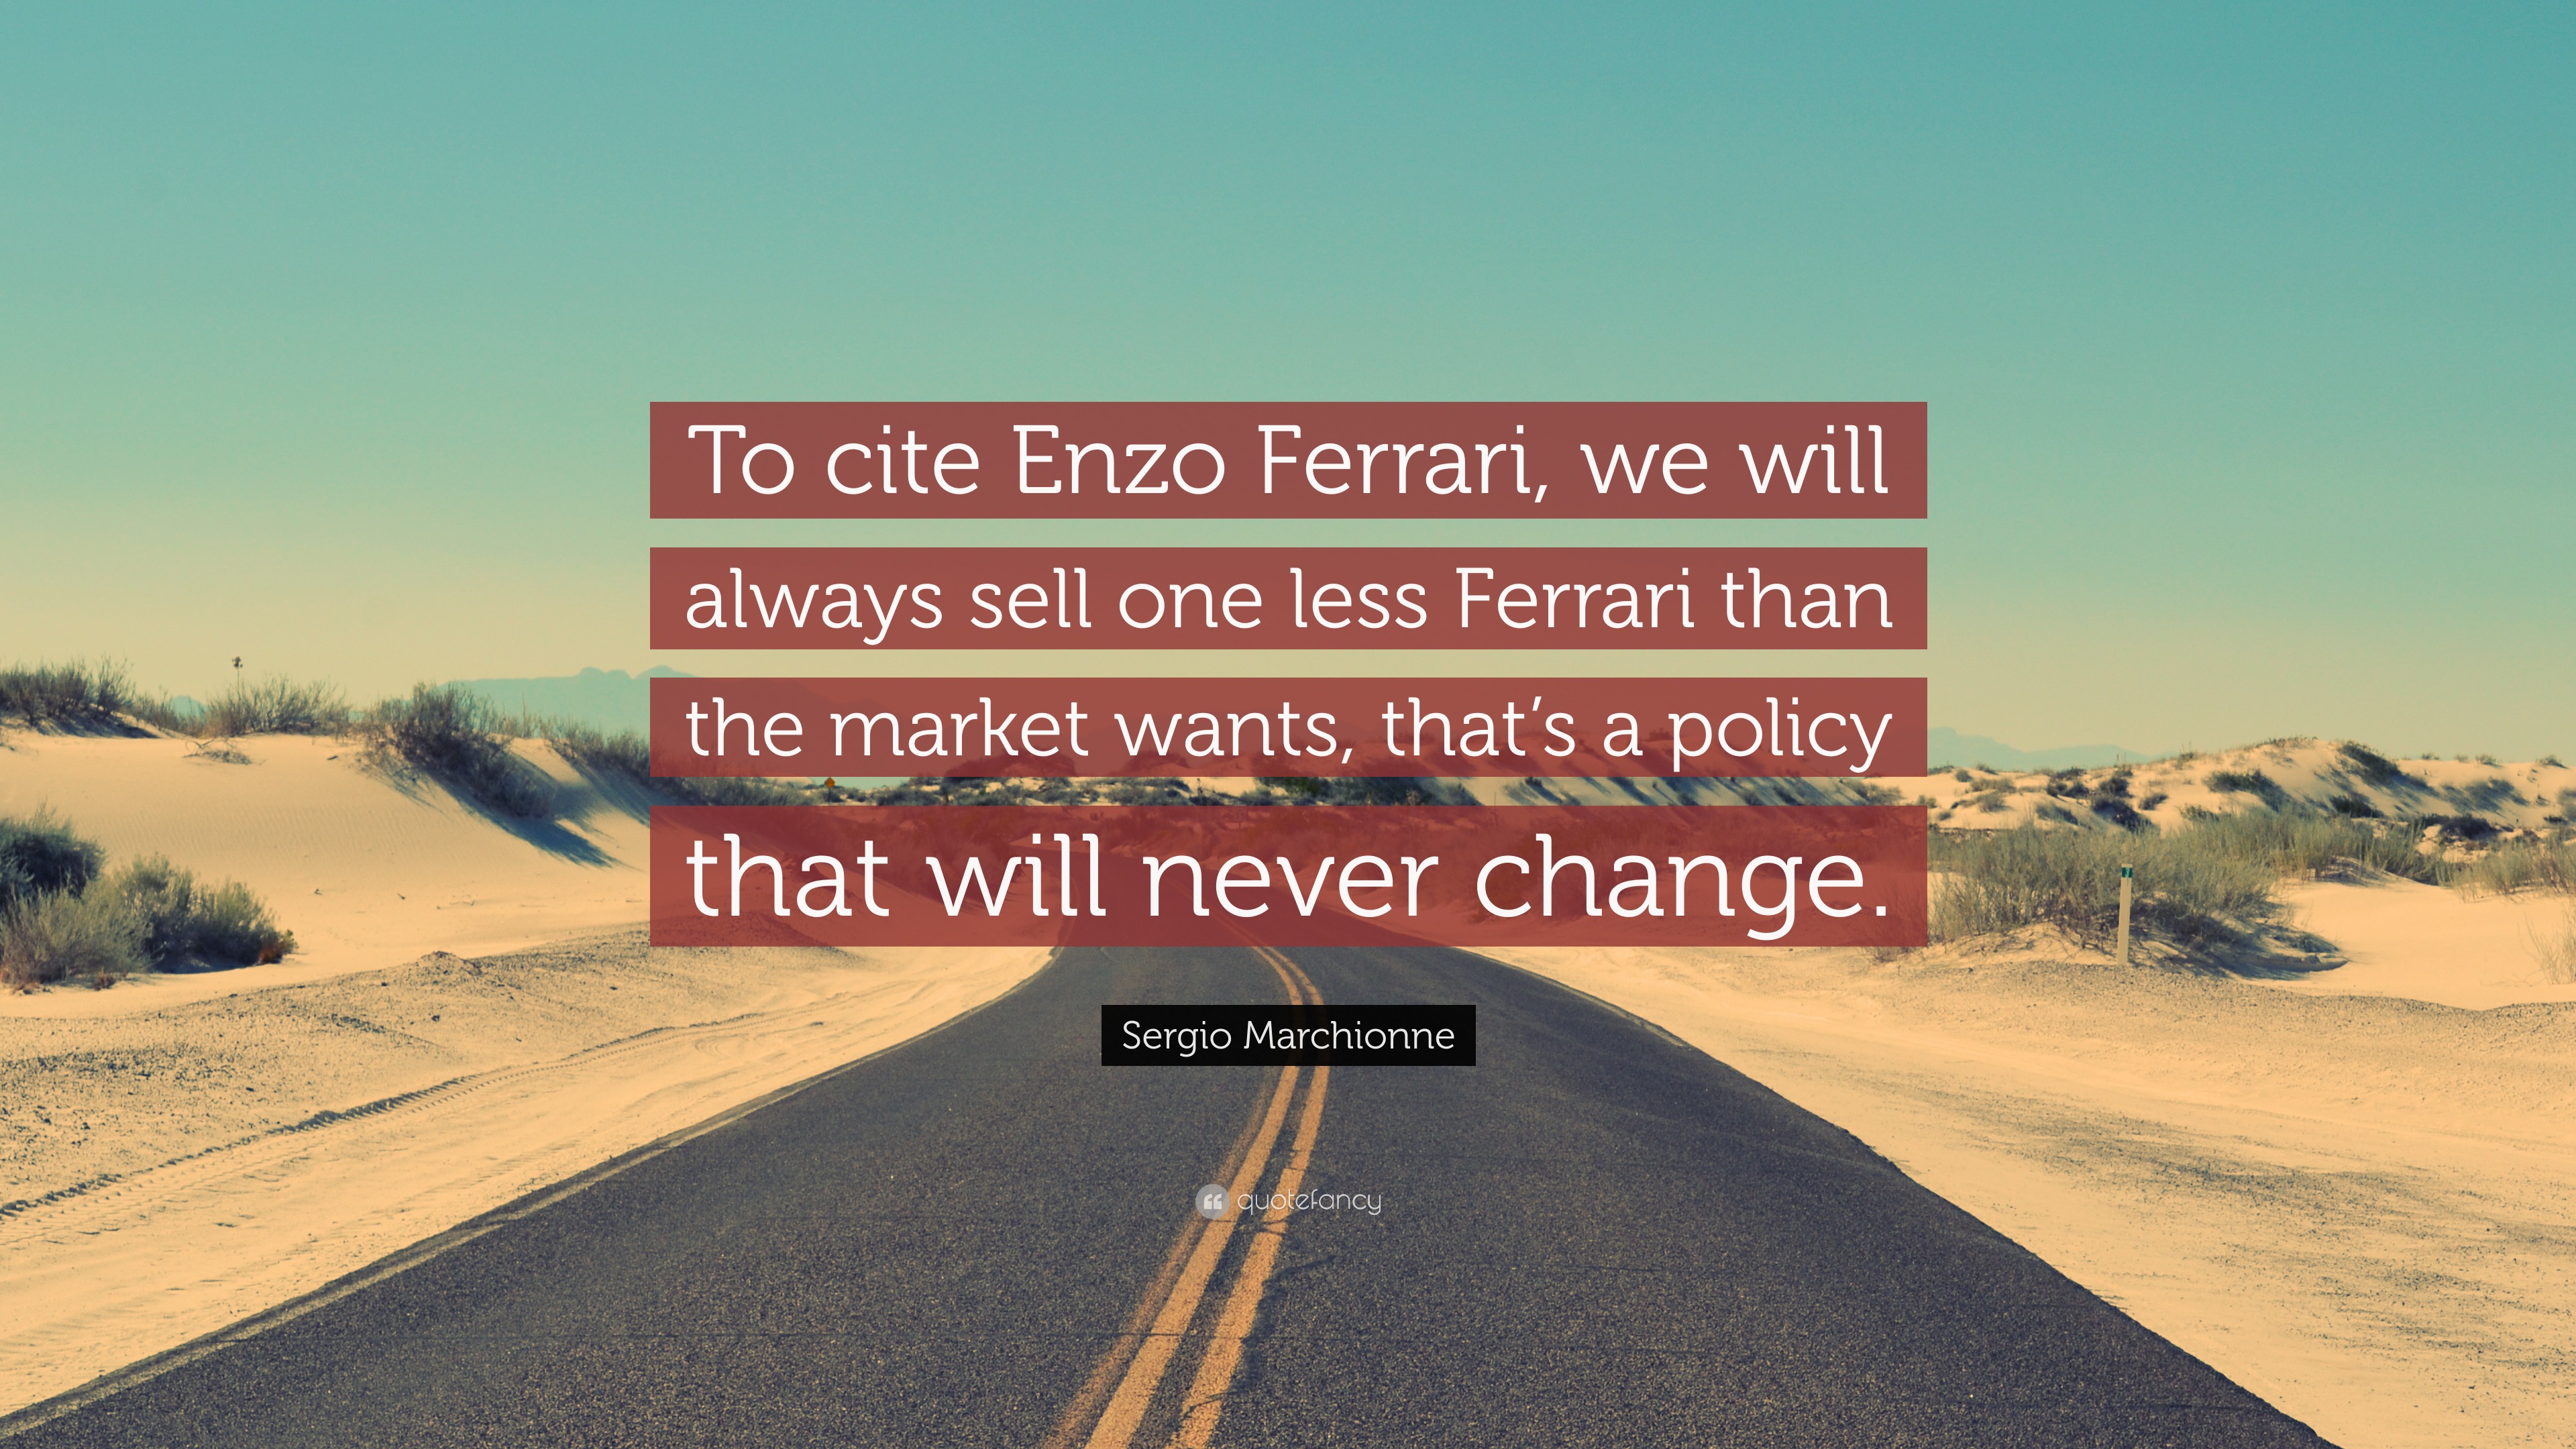 Sergio Marchionne Quote To Cite Enzo Ferrari We Will Always Sell One Less Ferrari Than The Market Wants That S A Policy That Will Never Change